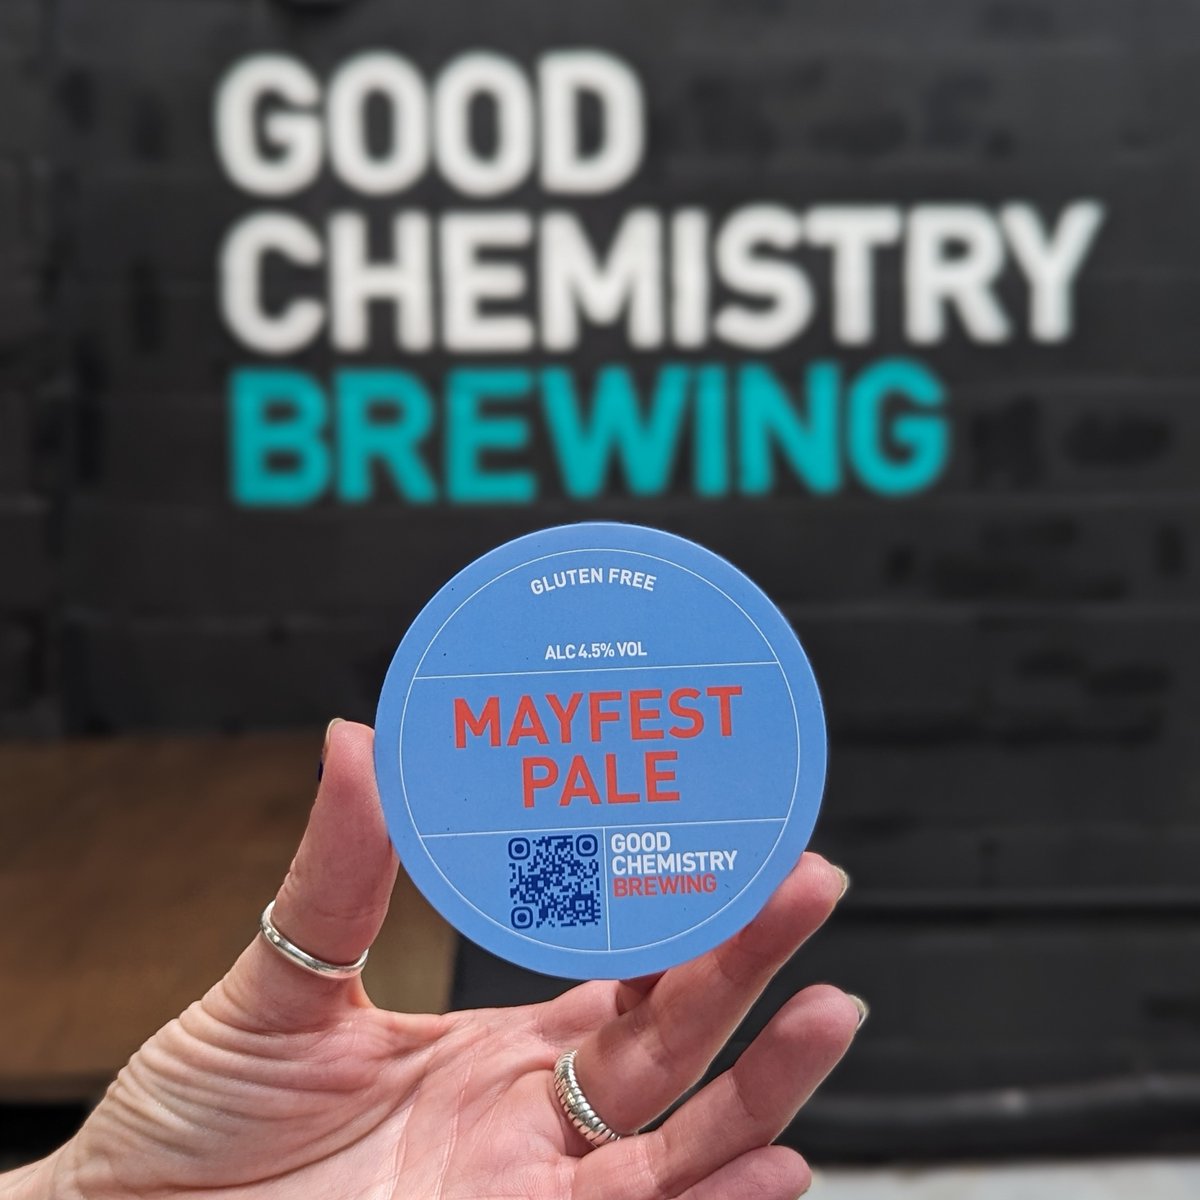 ...look out for our brand new collaboration MAYFEST PALE across the festival! Popping up on the bars of some of Mayfest’s partner venues, we can’t wait for you to try our gluten-free, vegan-friendly 4.5% pale ale – cheers! @mayfestbristol mayk.org.uk/mayfest (2/3)